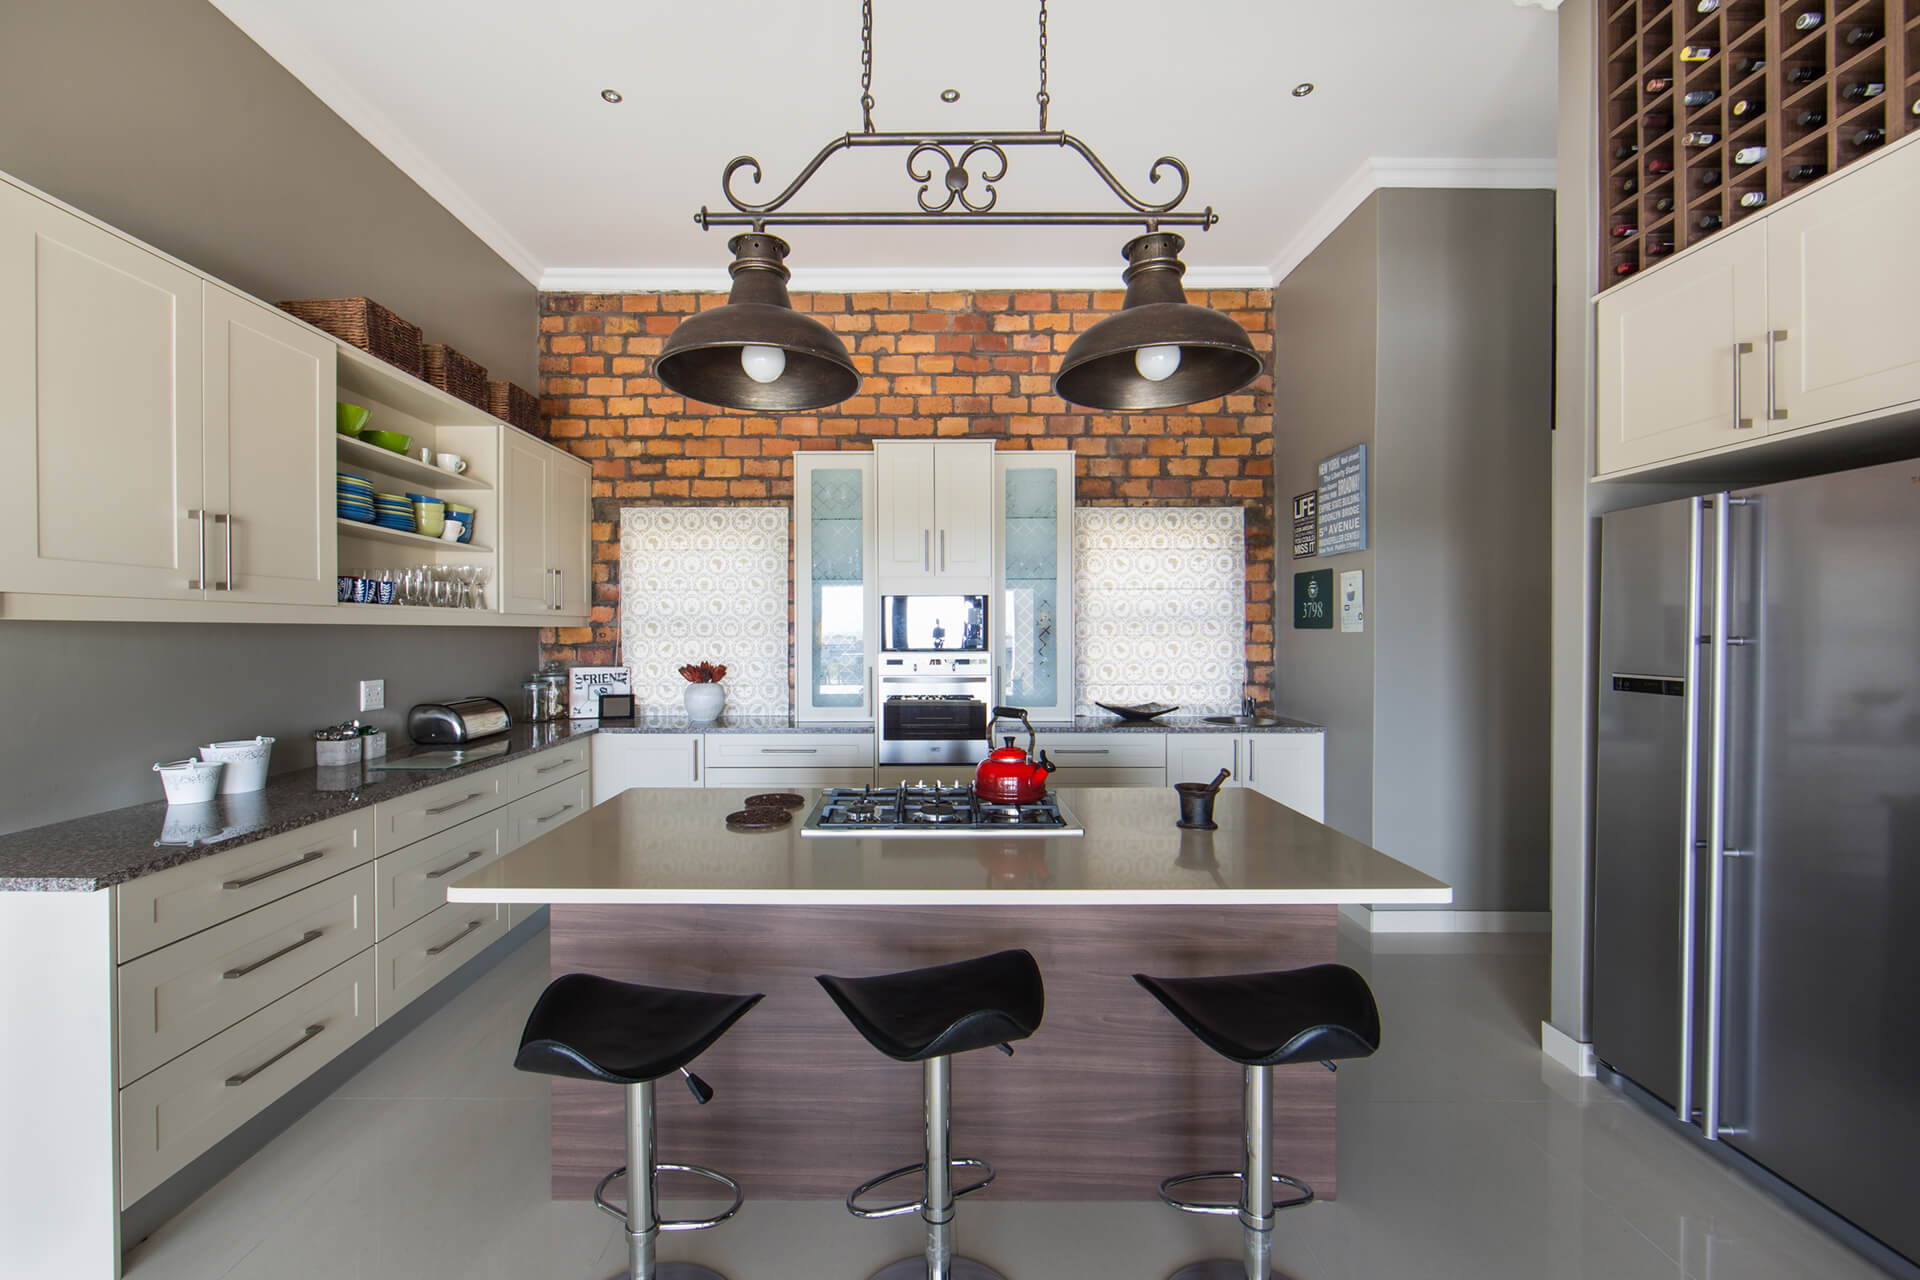 Essential Kitchens Kitchen Renovations In Cape Town